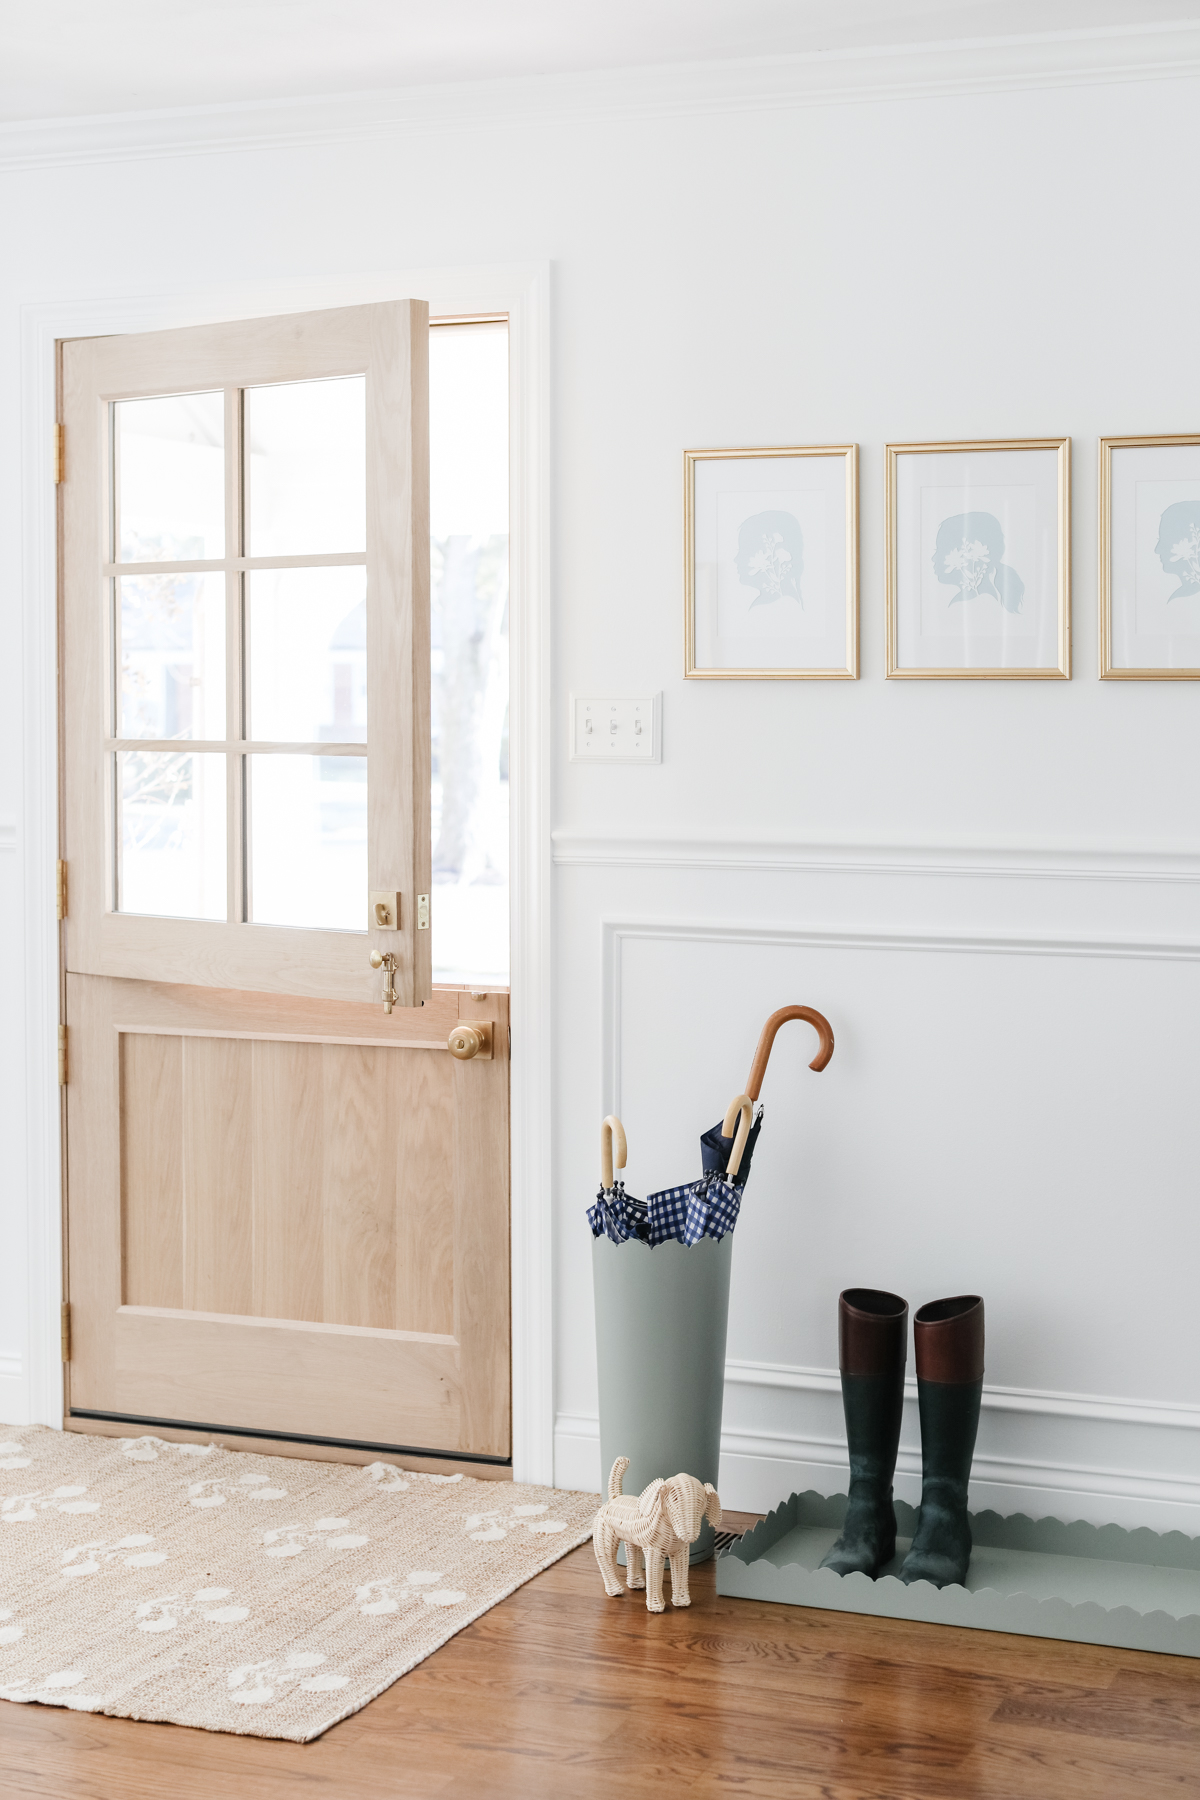 An entryway with a coat rack and boots is included in the house cleaning checklist.